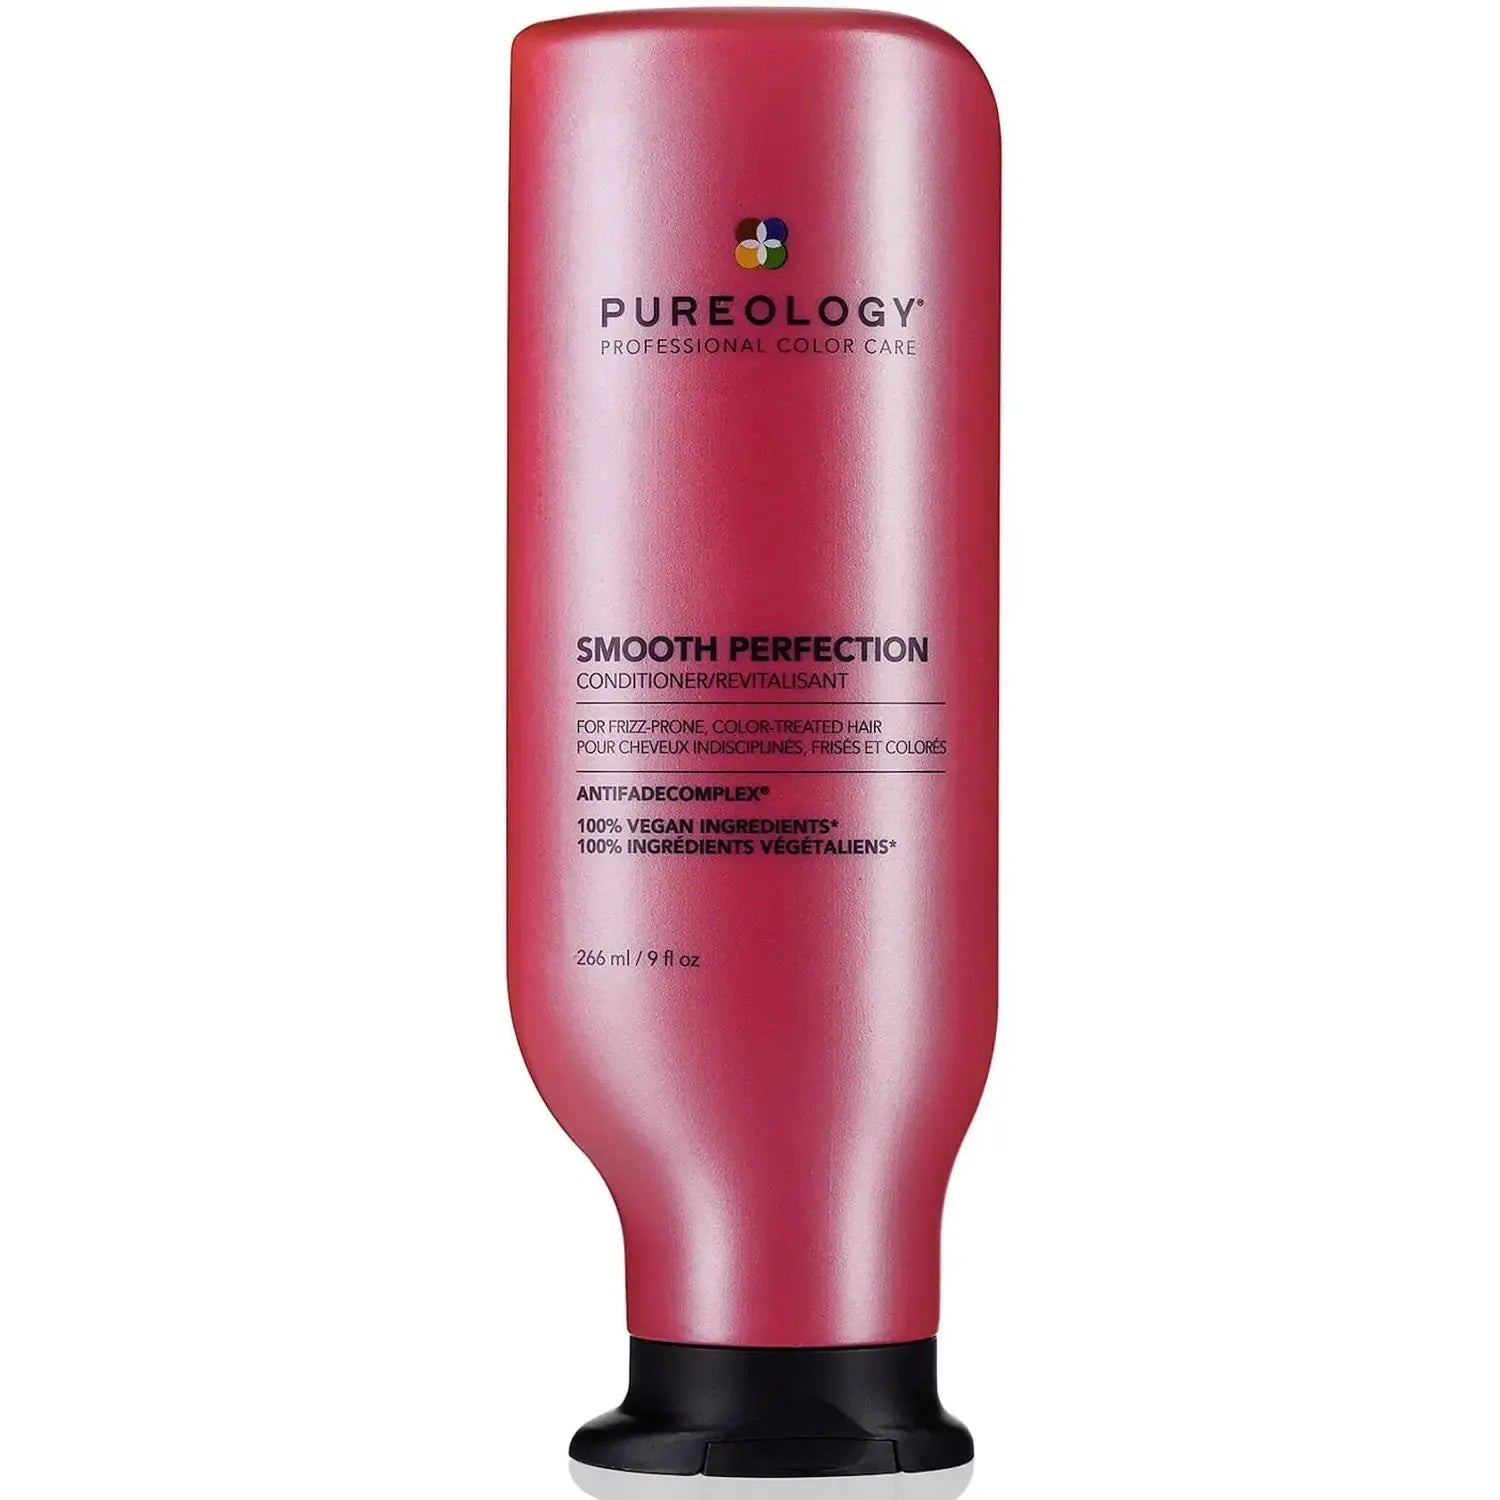 Pureology Smooth Perfection Conditioner 266ml - Hair Network